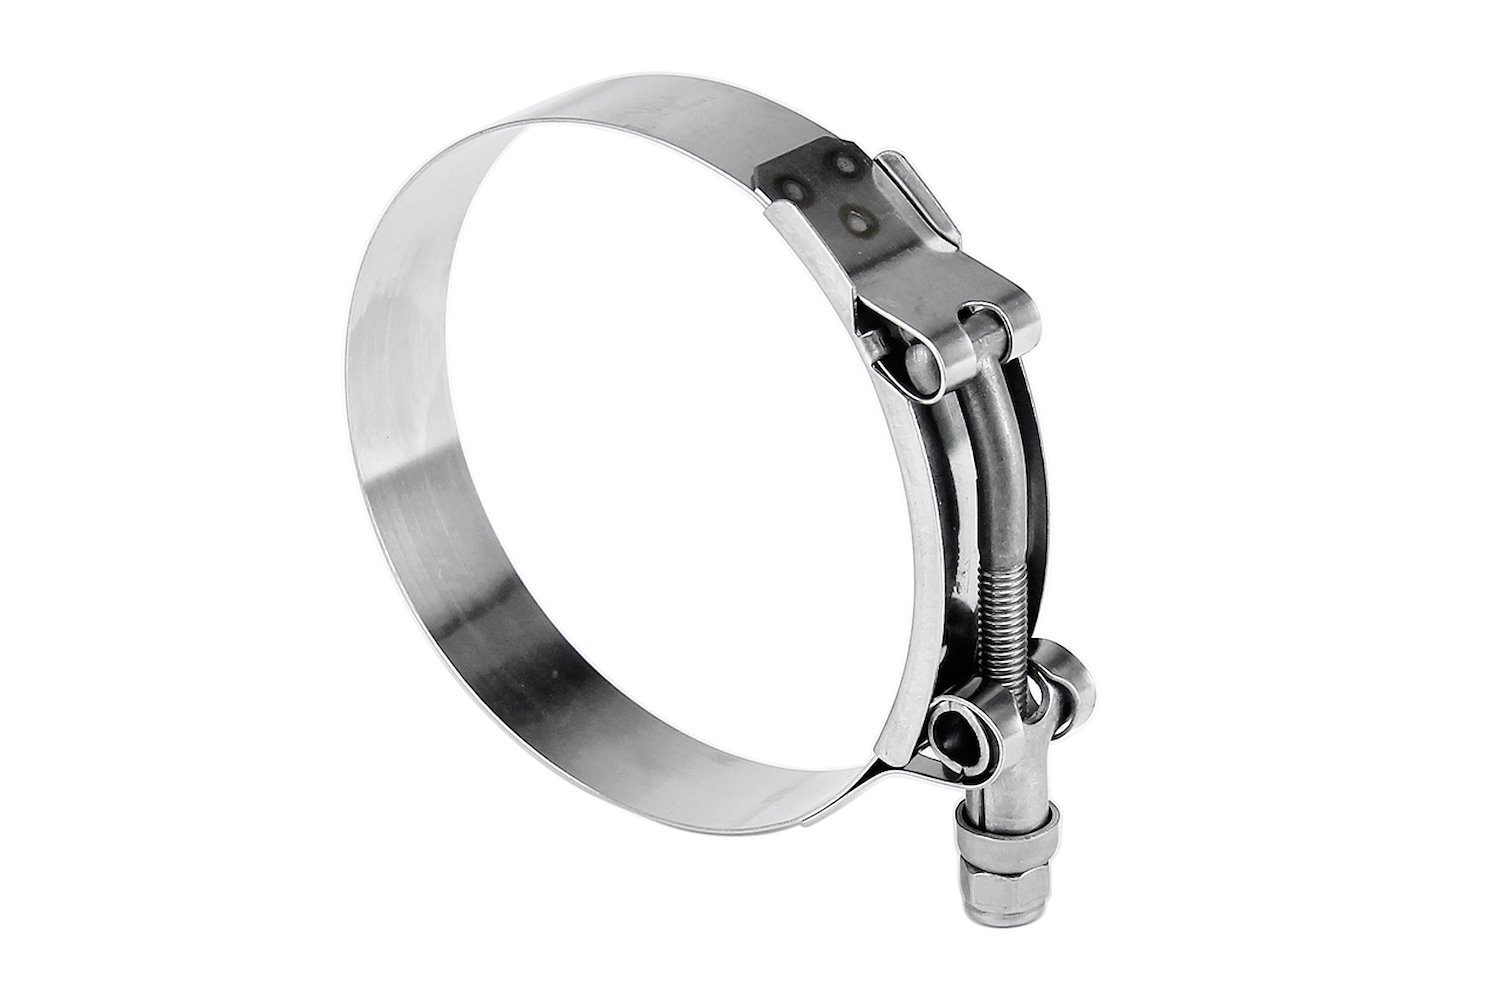 316-SSTC-159-167 100-Percent Marine Grade Stainless Steel T-Bolt Hose Clamp, Size #172, Range: 6.26 in.- 6.57 in.